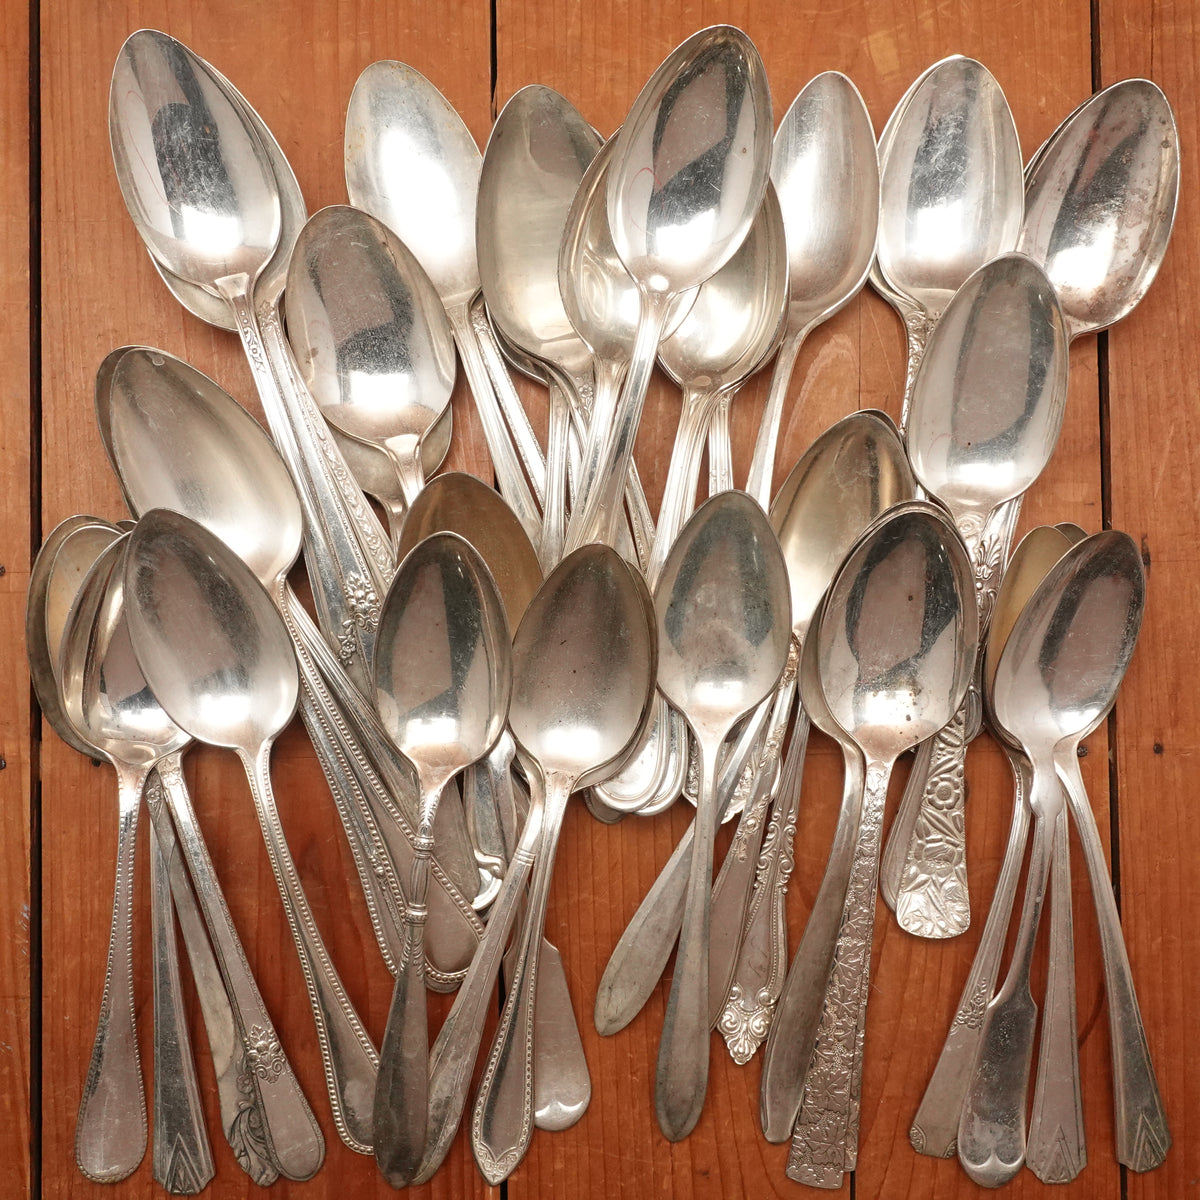 Assorted Vintage Large Silver Plate Spoon - 1 piece